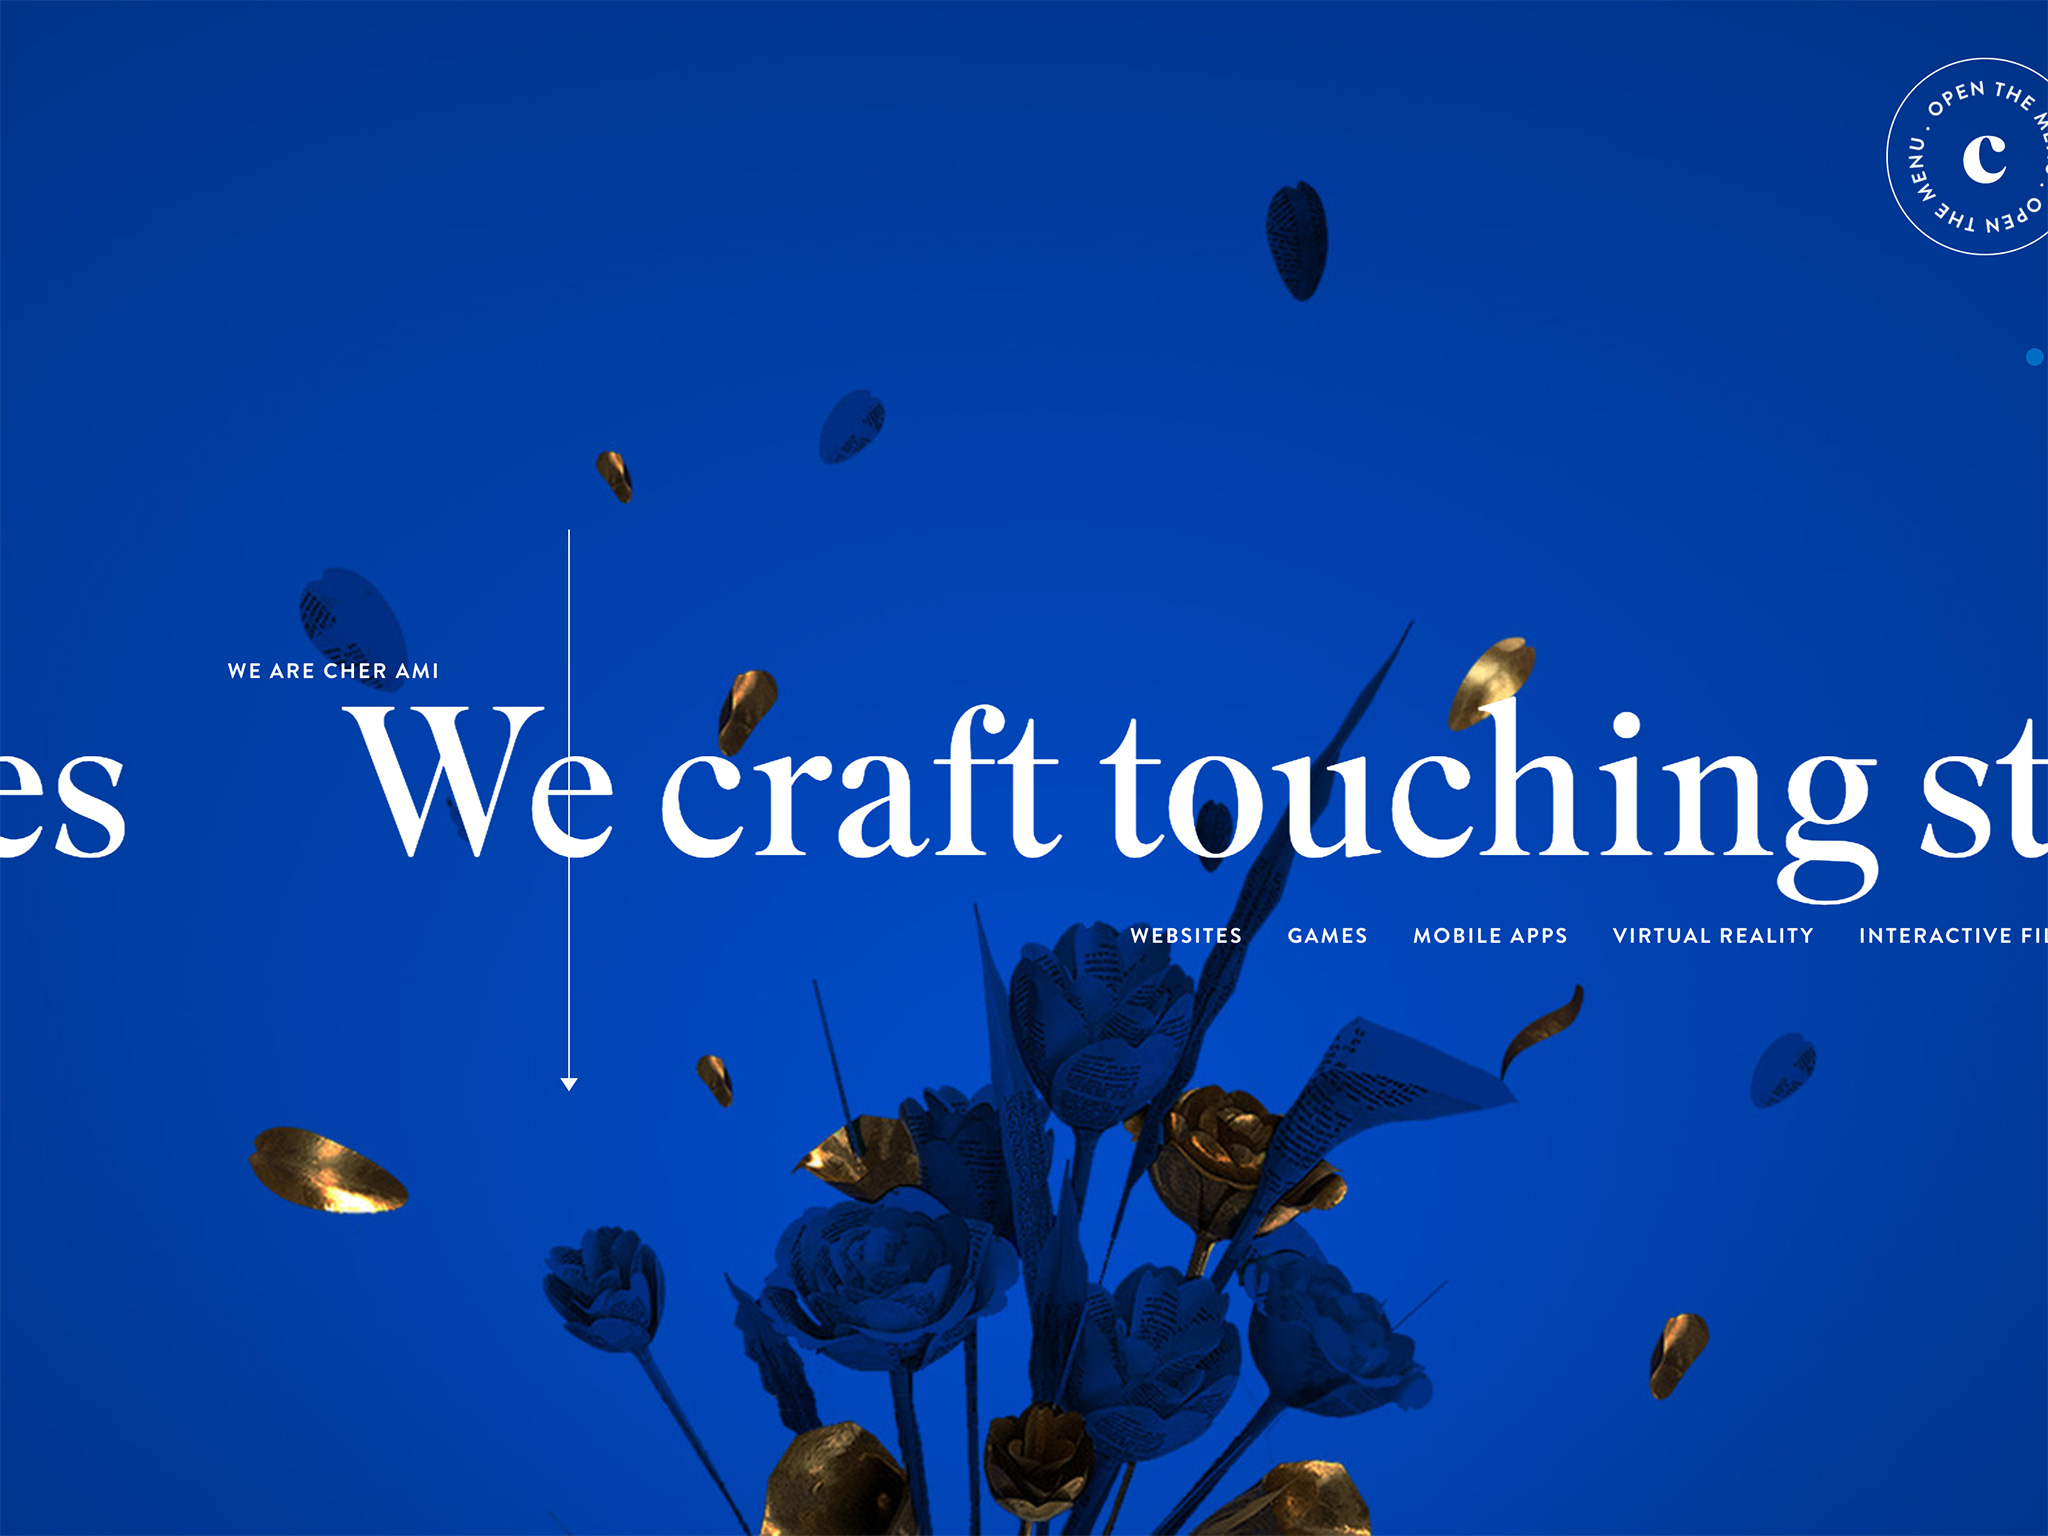 Cher Ami – We craft touching stories